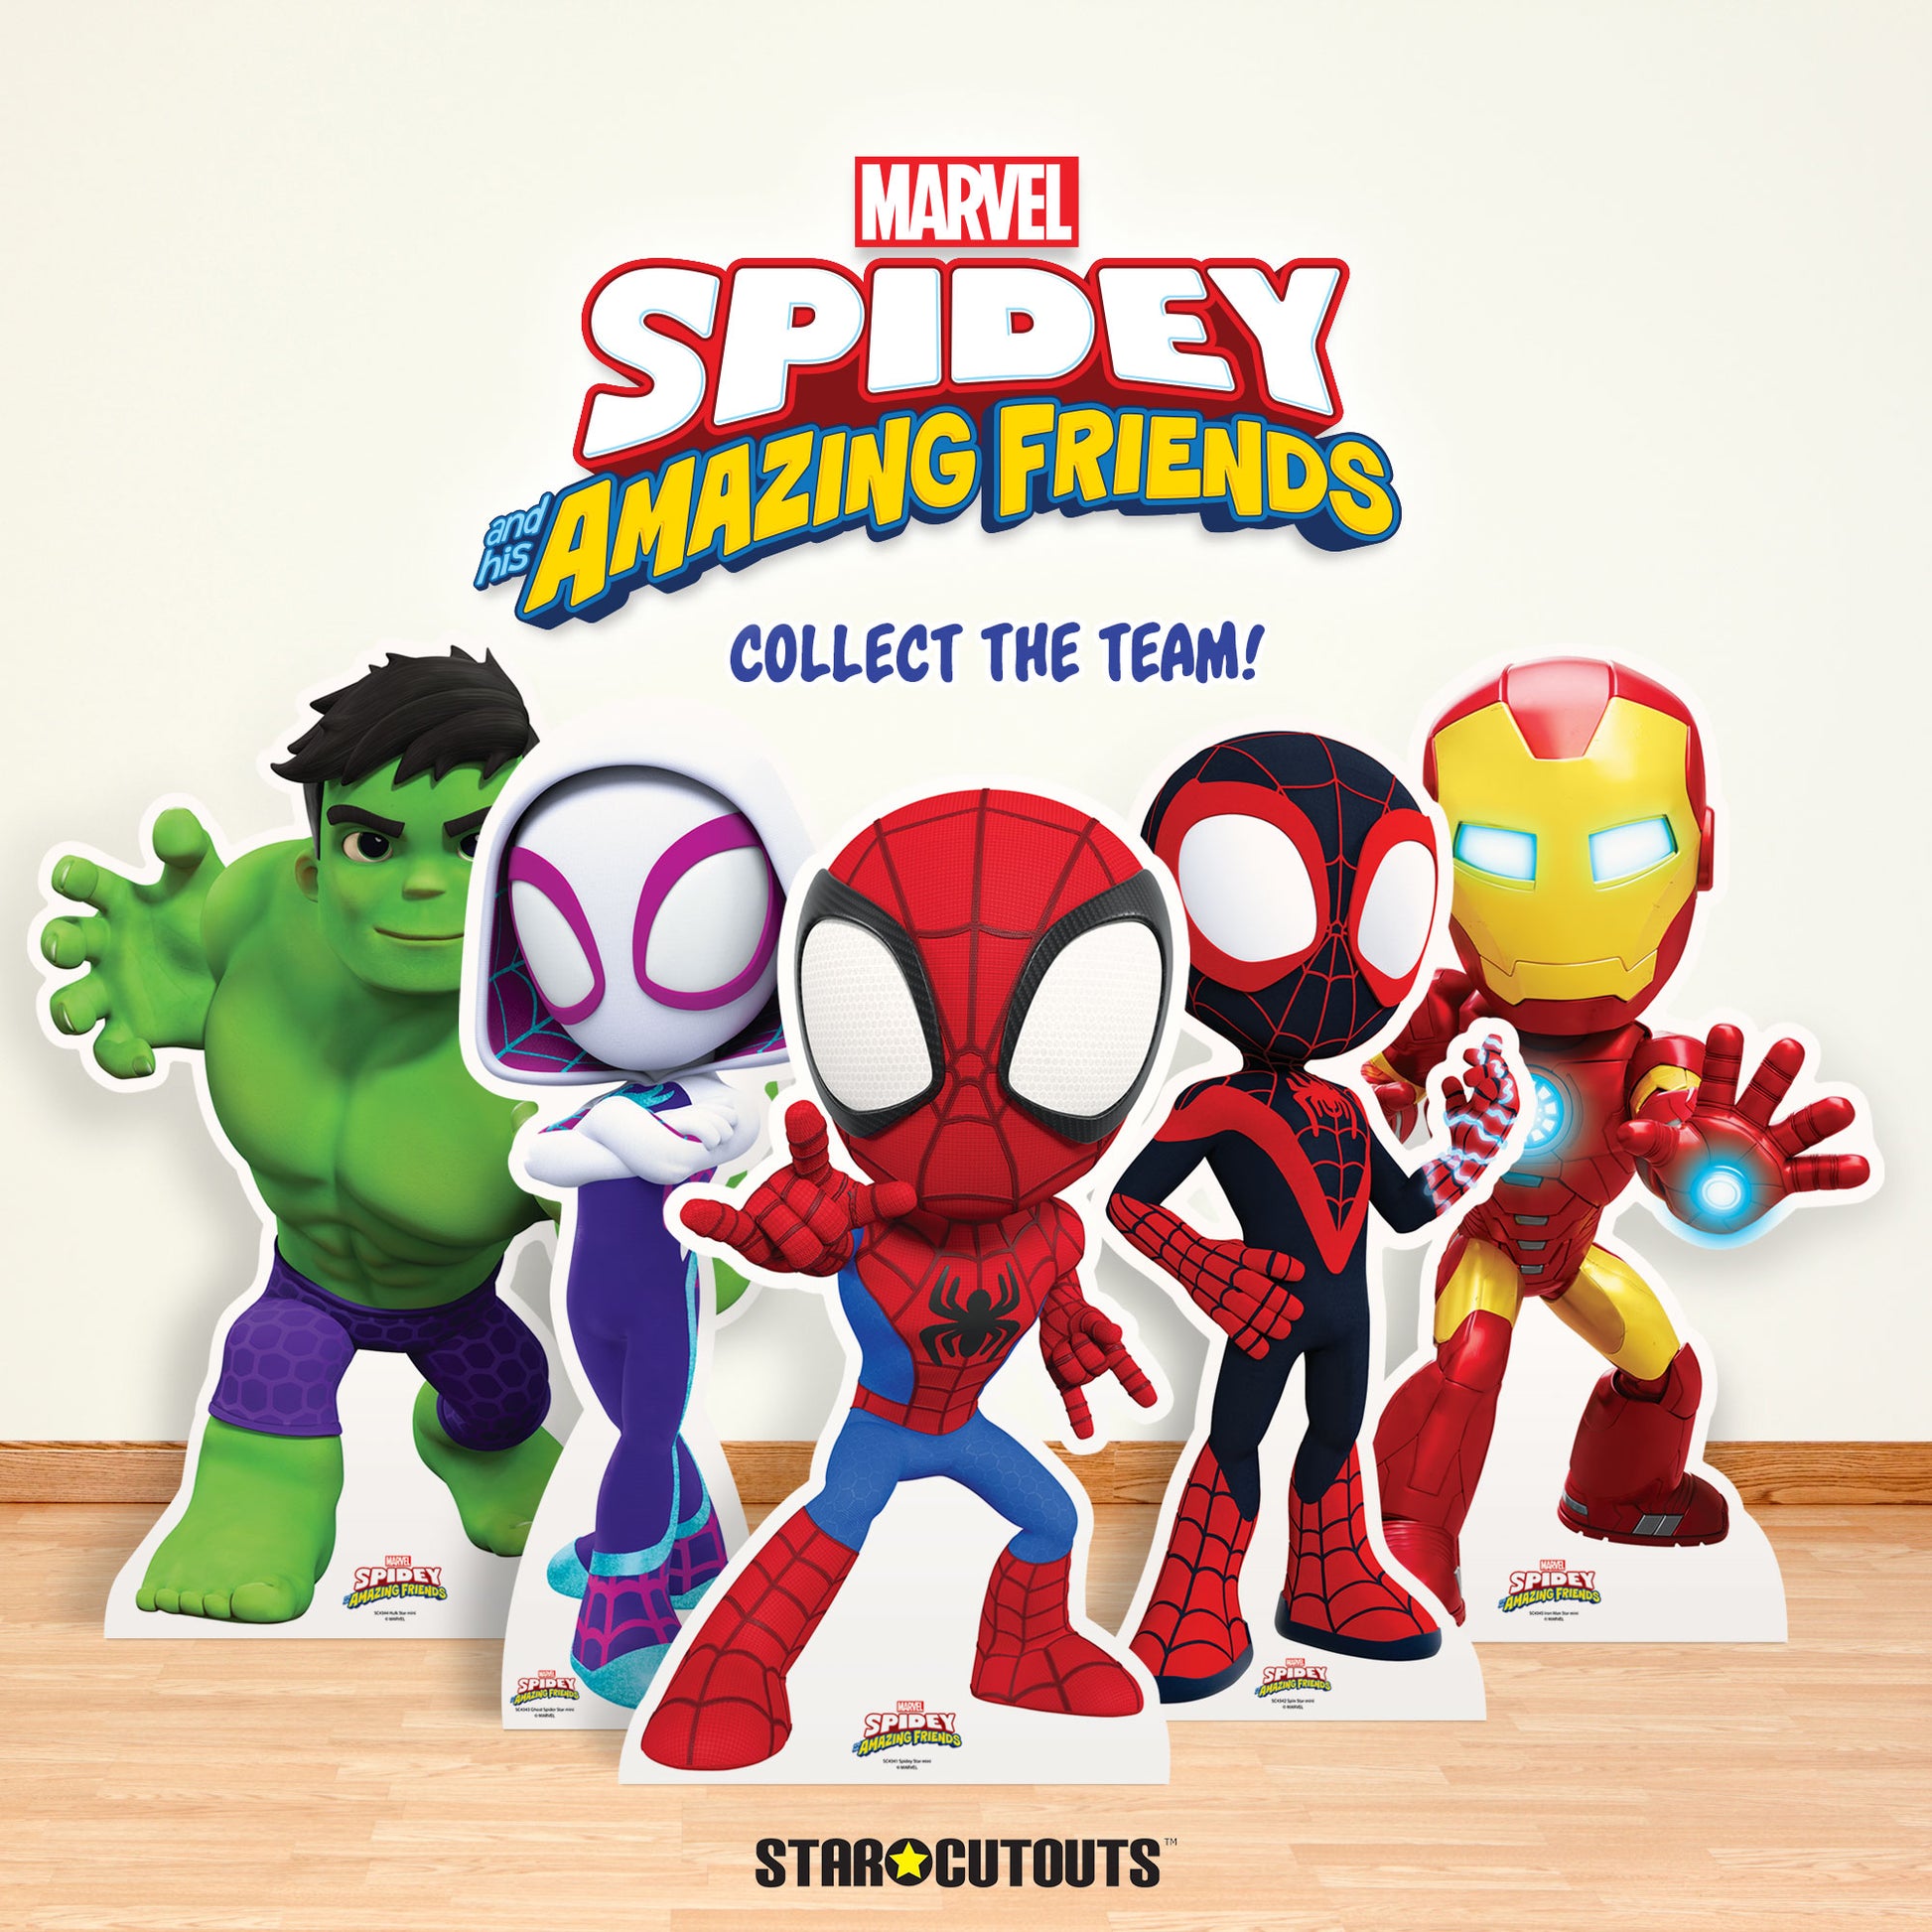 SC4343 Ghost Spider Spidey and His Amazing Friends Cardboard